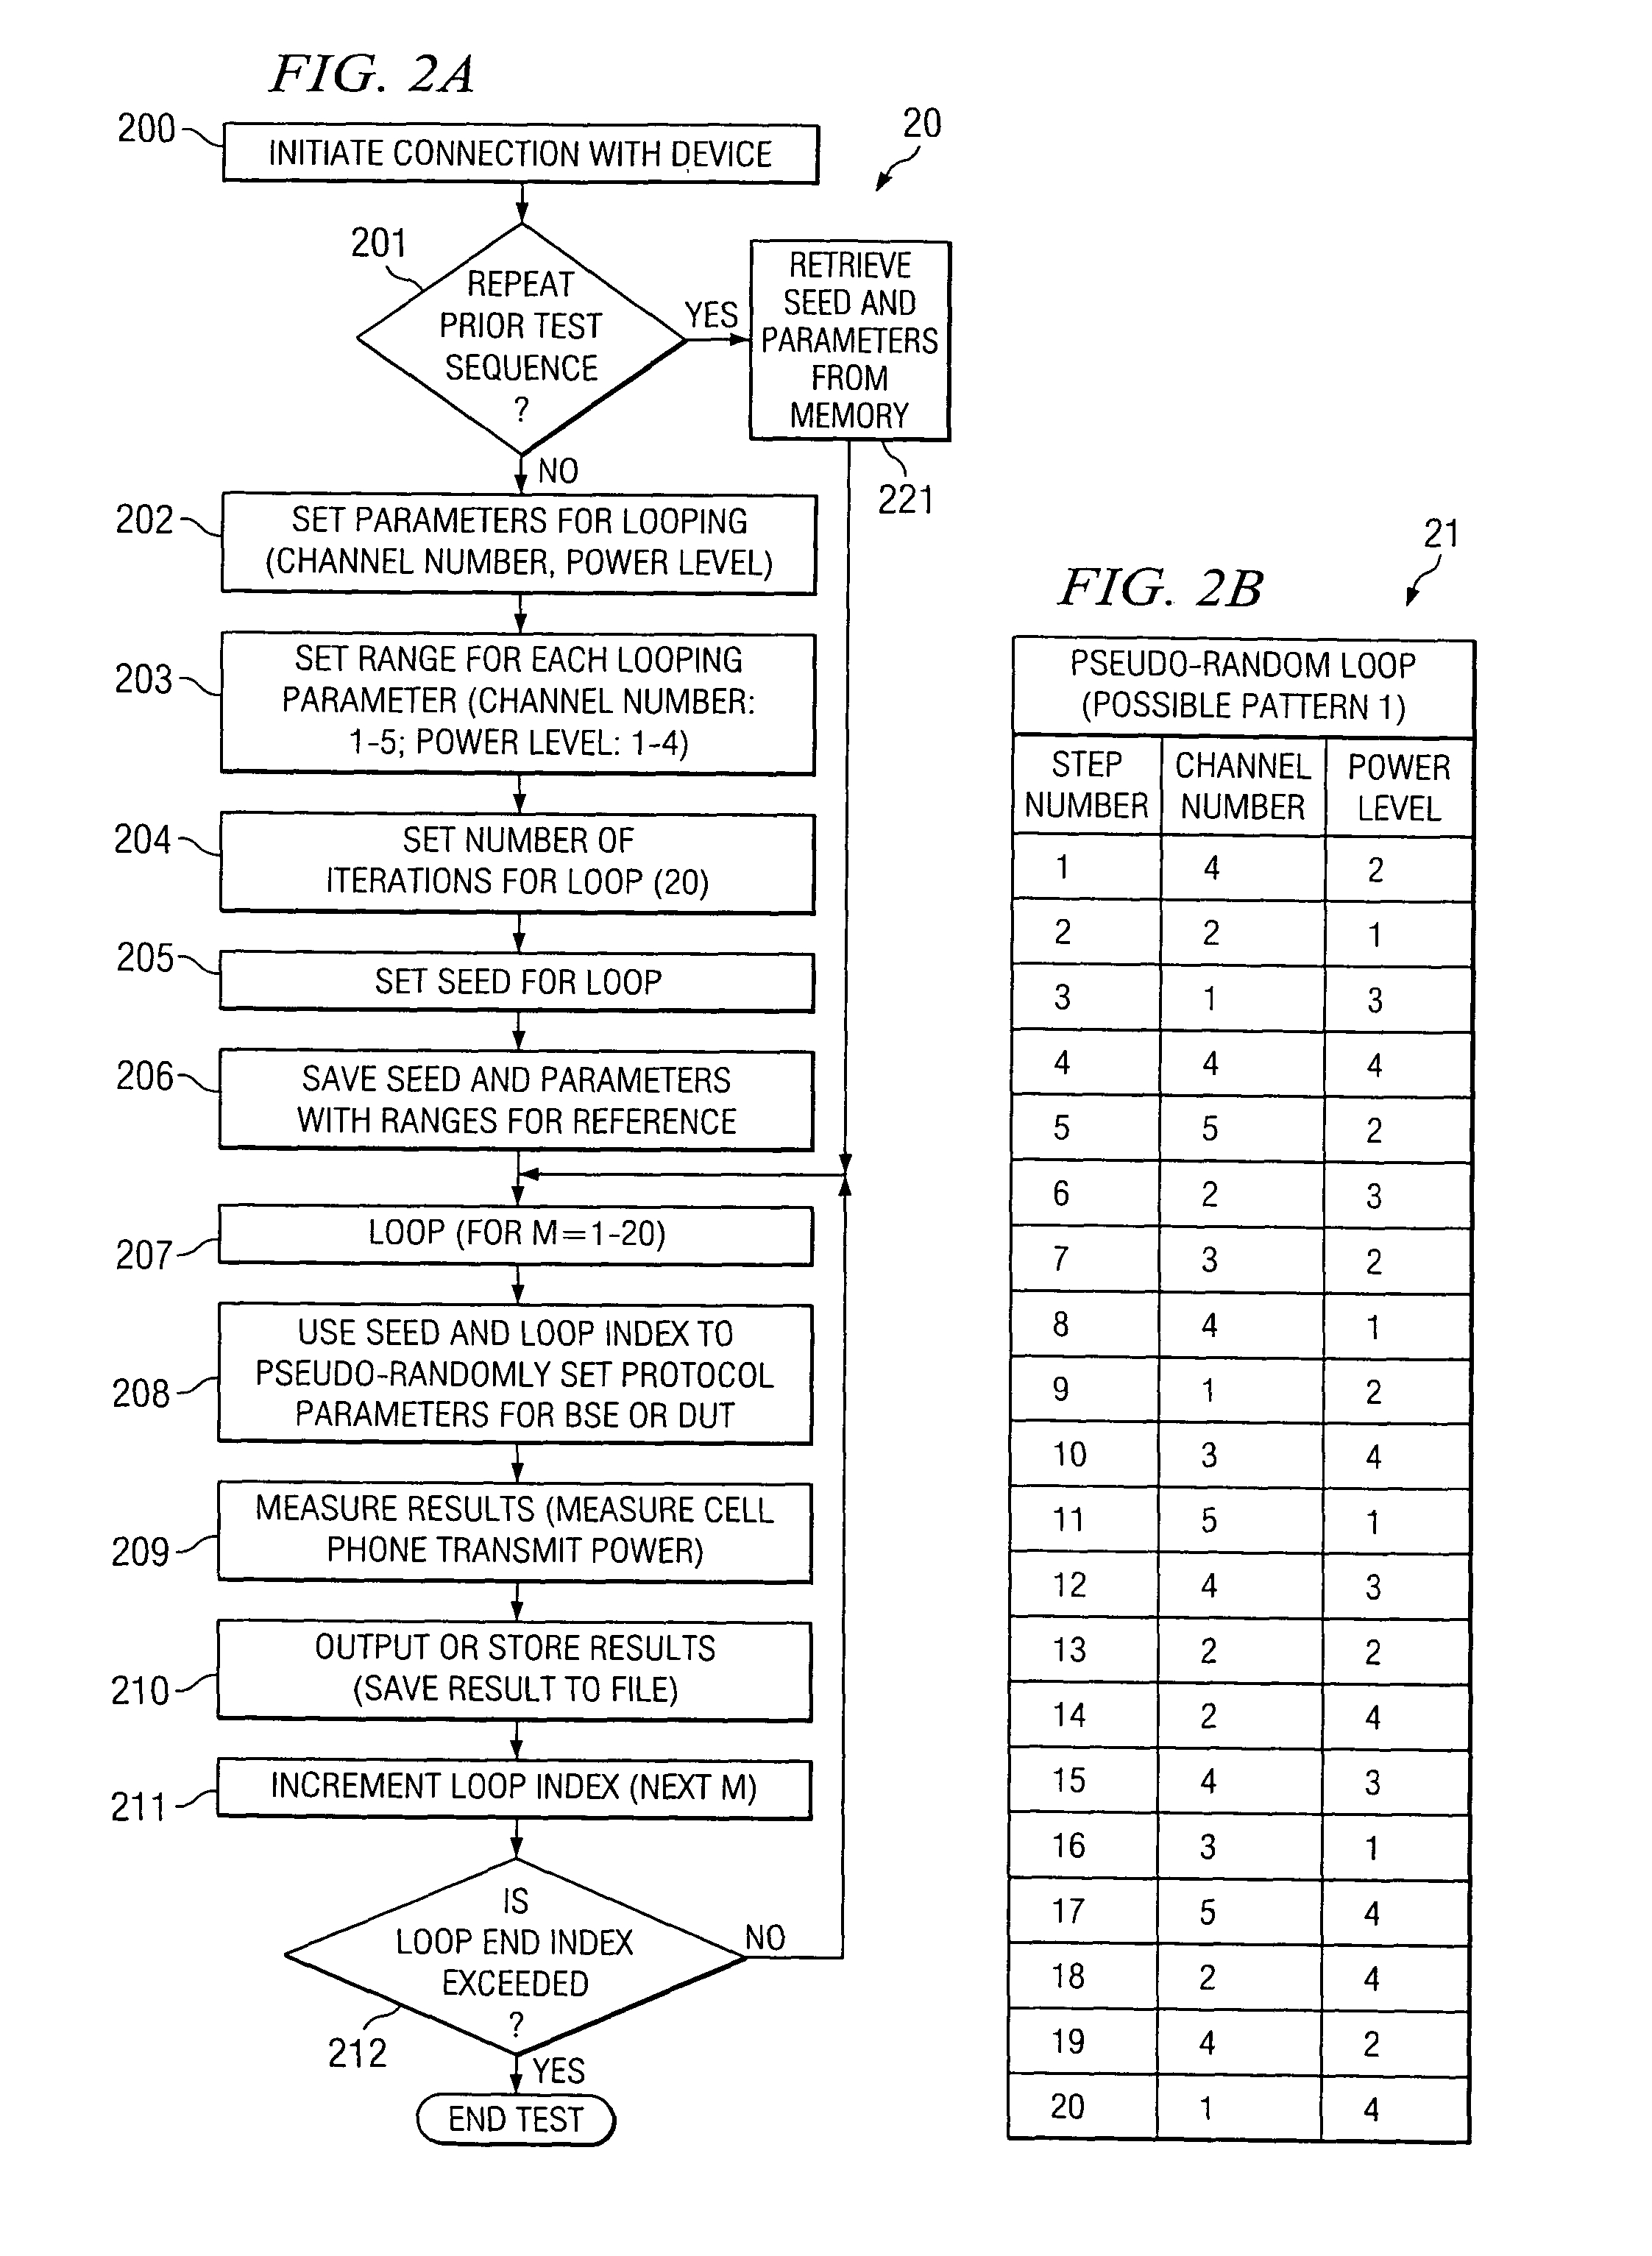 System and method for electronic device testing using random parameter looping